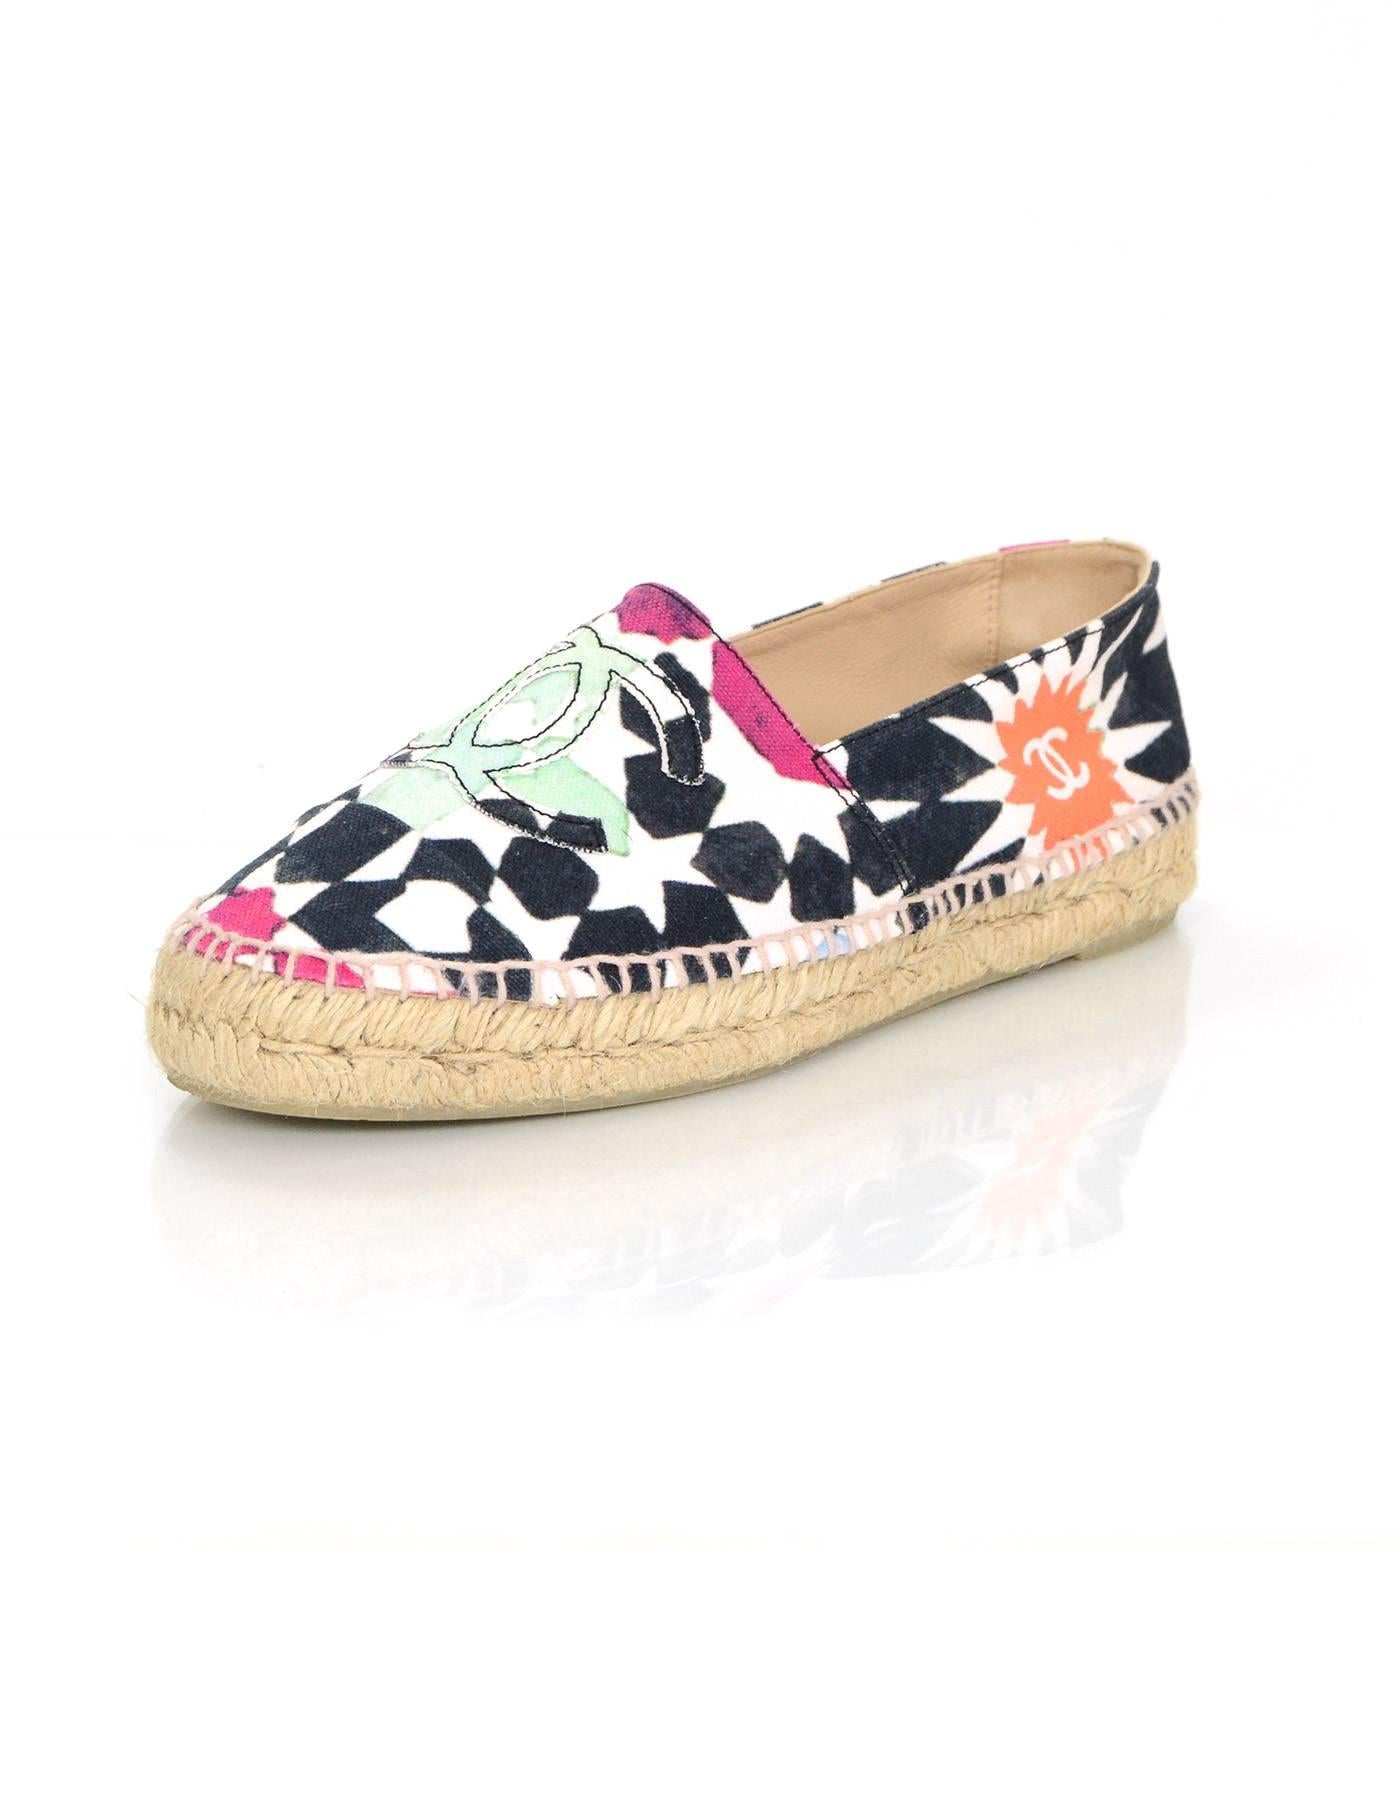 Chanel Multi-Colored Star Print Canvas Espadrilles
Features multi-colored CC's stitched on toe cap

Made In: Spain
Color: White, navy, orange, purple and teal
Materials: Canvas
Closure/Opening: Slide on
Sole Stamp: 39 Made in Spain Chanel CC
Overall